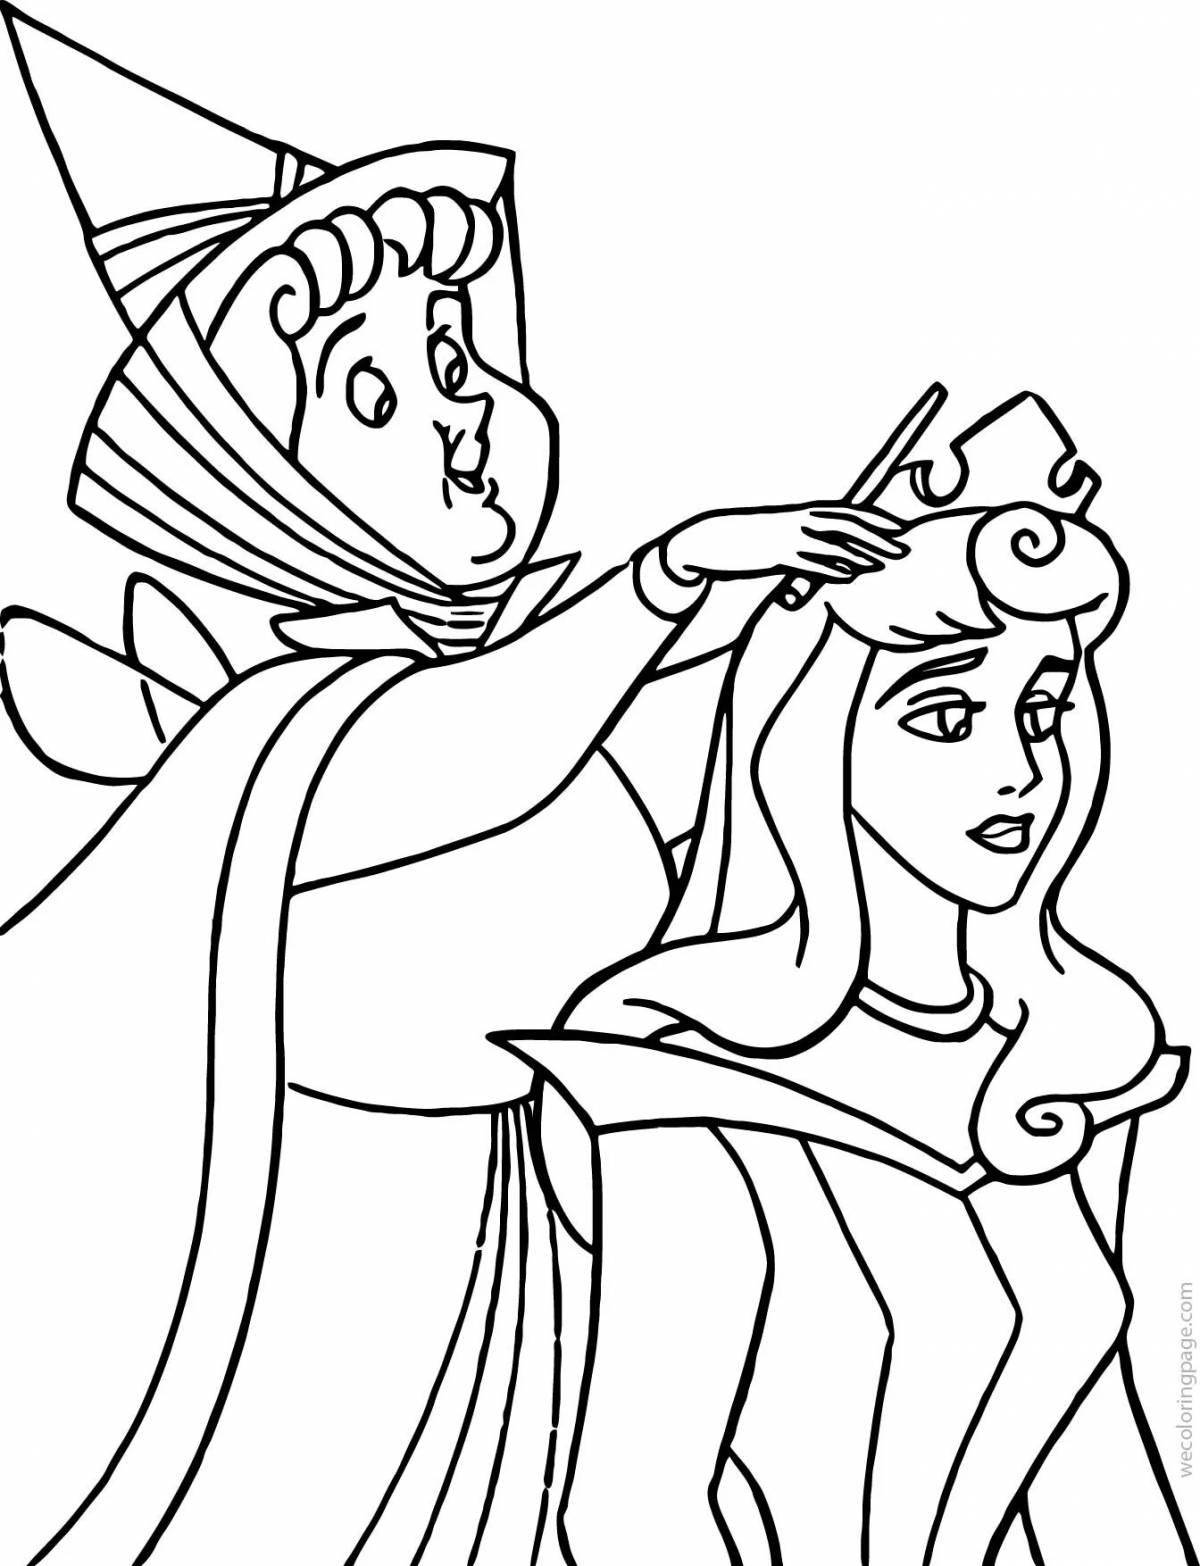 Amazing sleeping beauty coloring book for kids